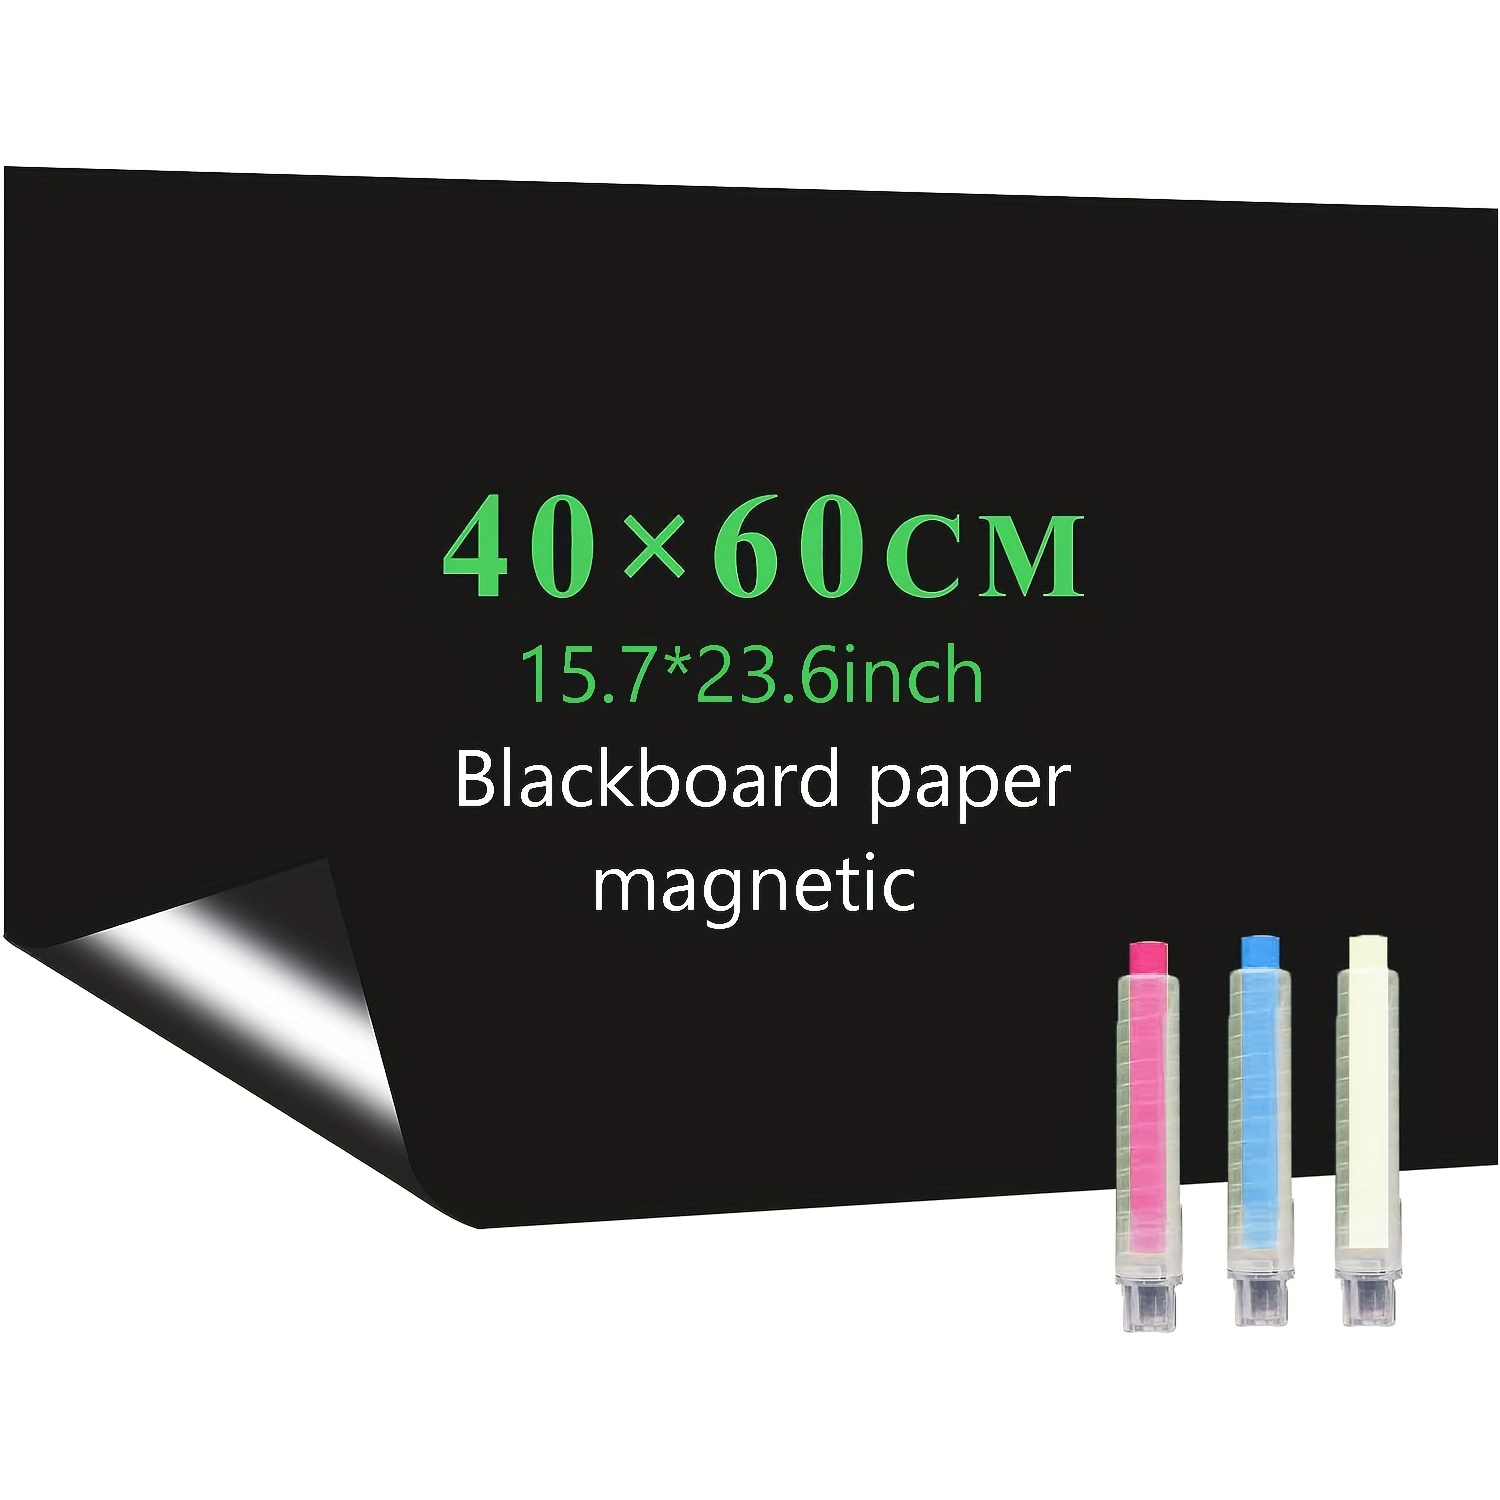  Self Adhesive Magnetic Sheets - Make Anything a Magnet -  Magnetic Adhesive Sheets -Premium Quality Peel and Stick Magnets by  Flexible Magnets 60 mil (8 x 10, Pack of 5) : Office Products